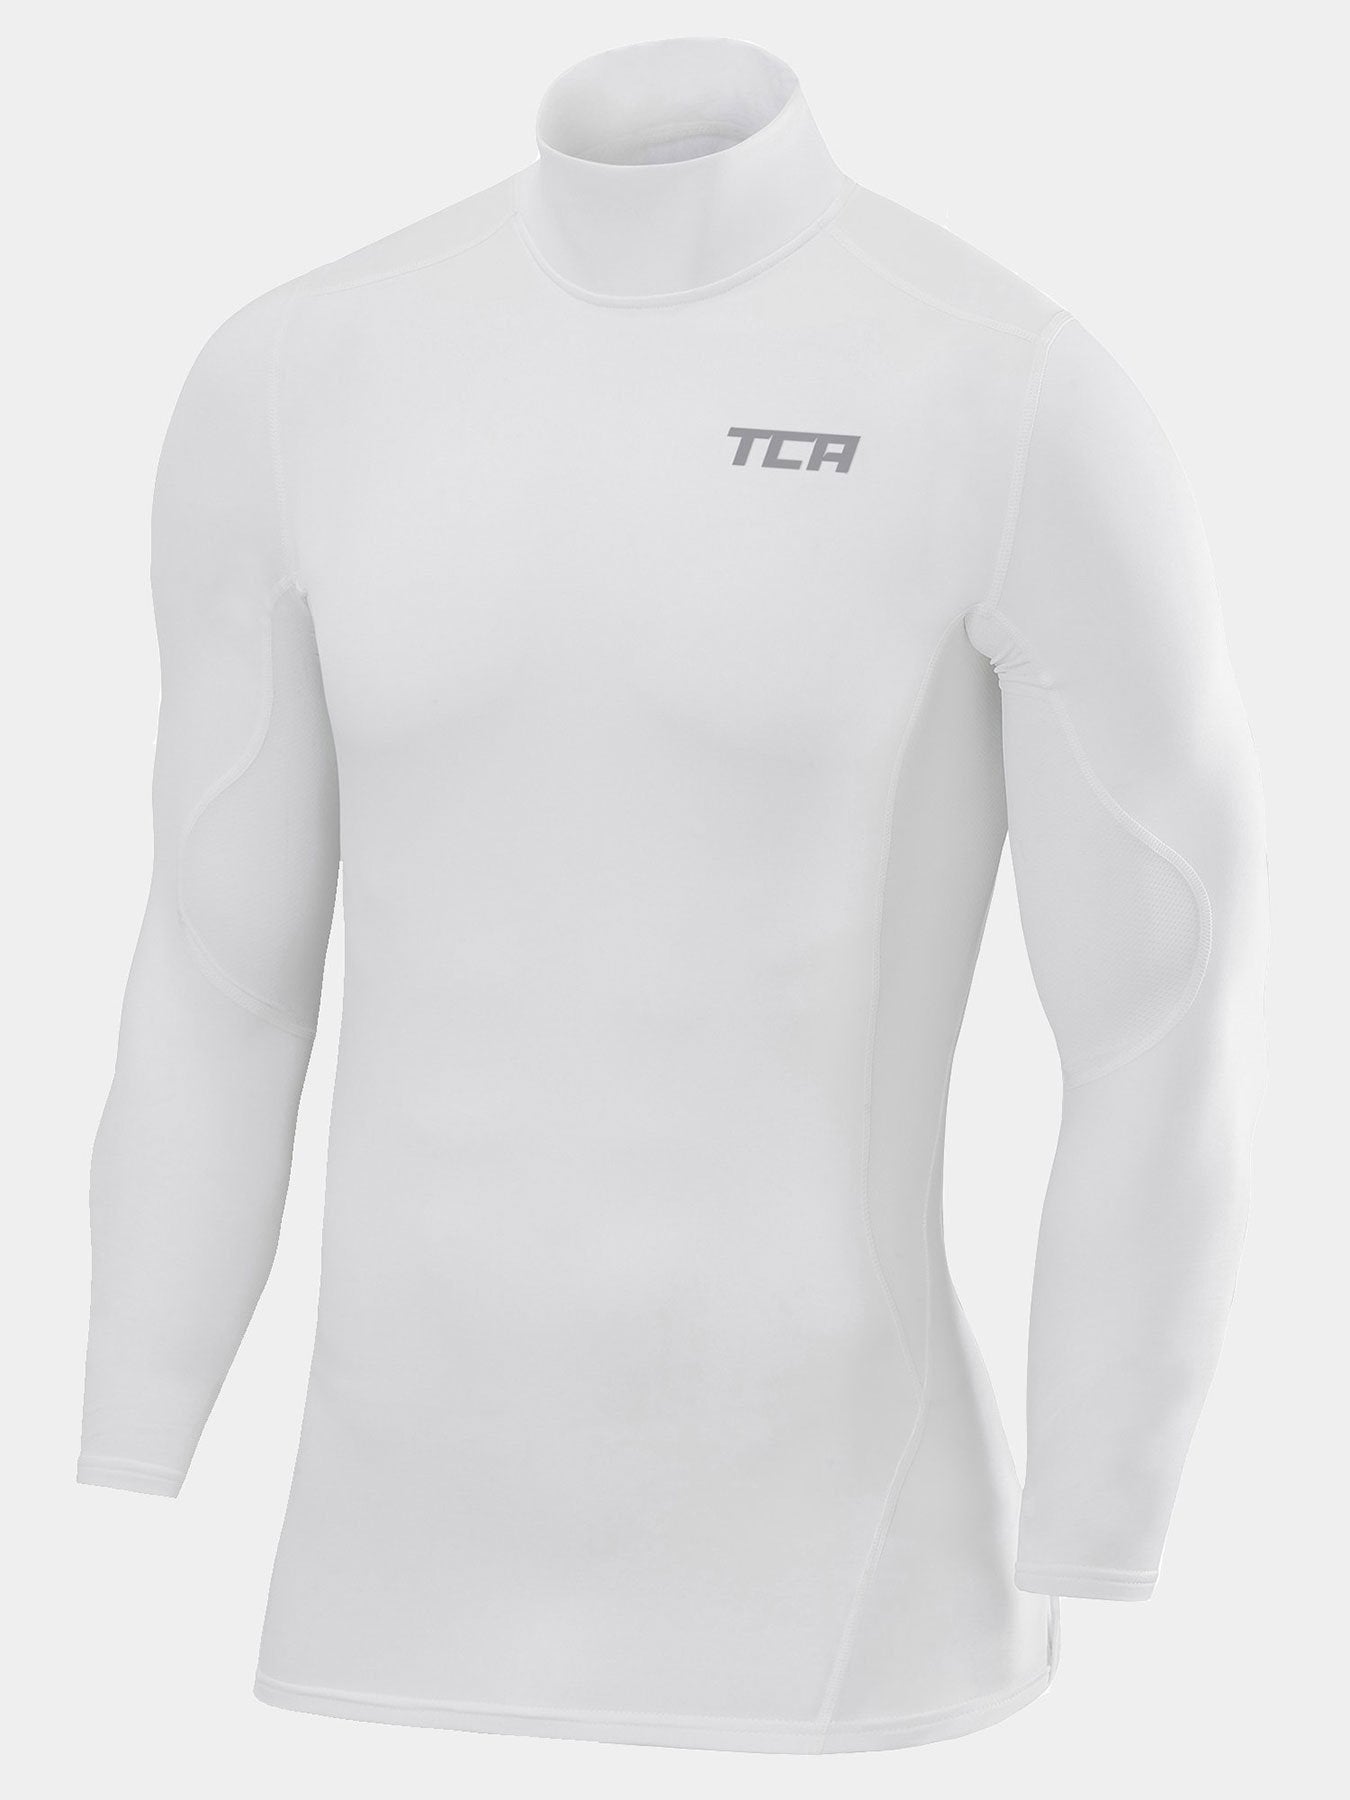 Under Armour white base layer long sleeve top